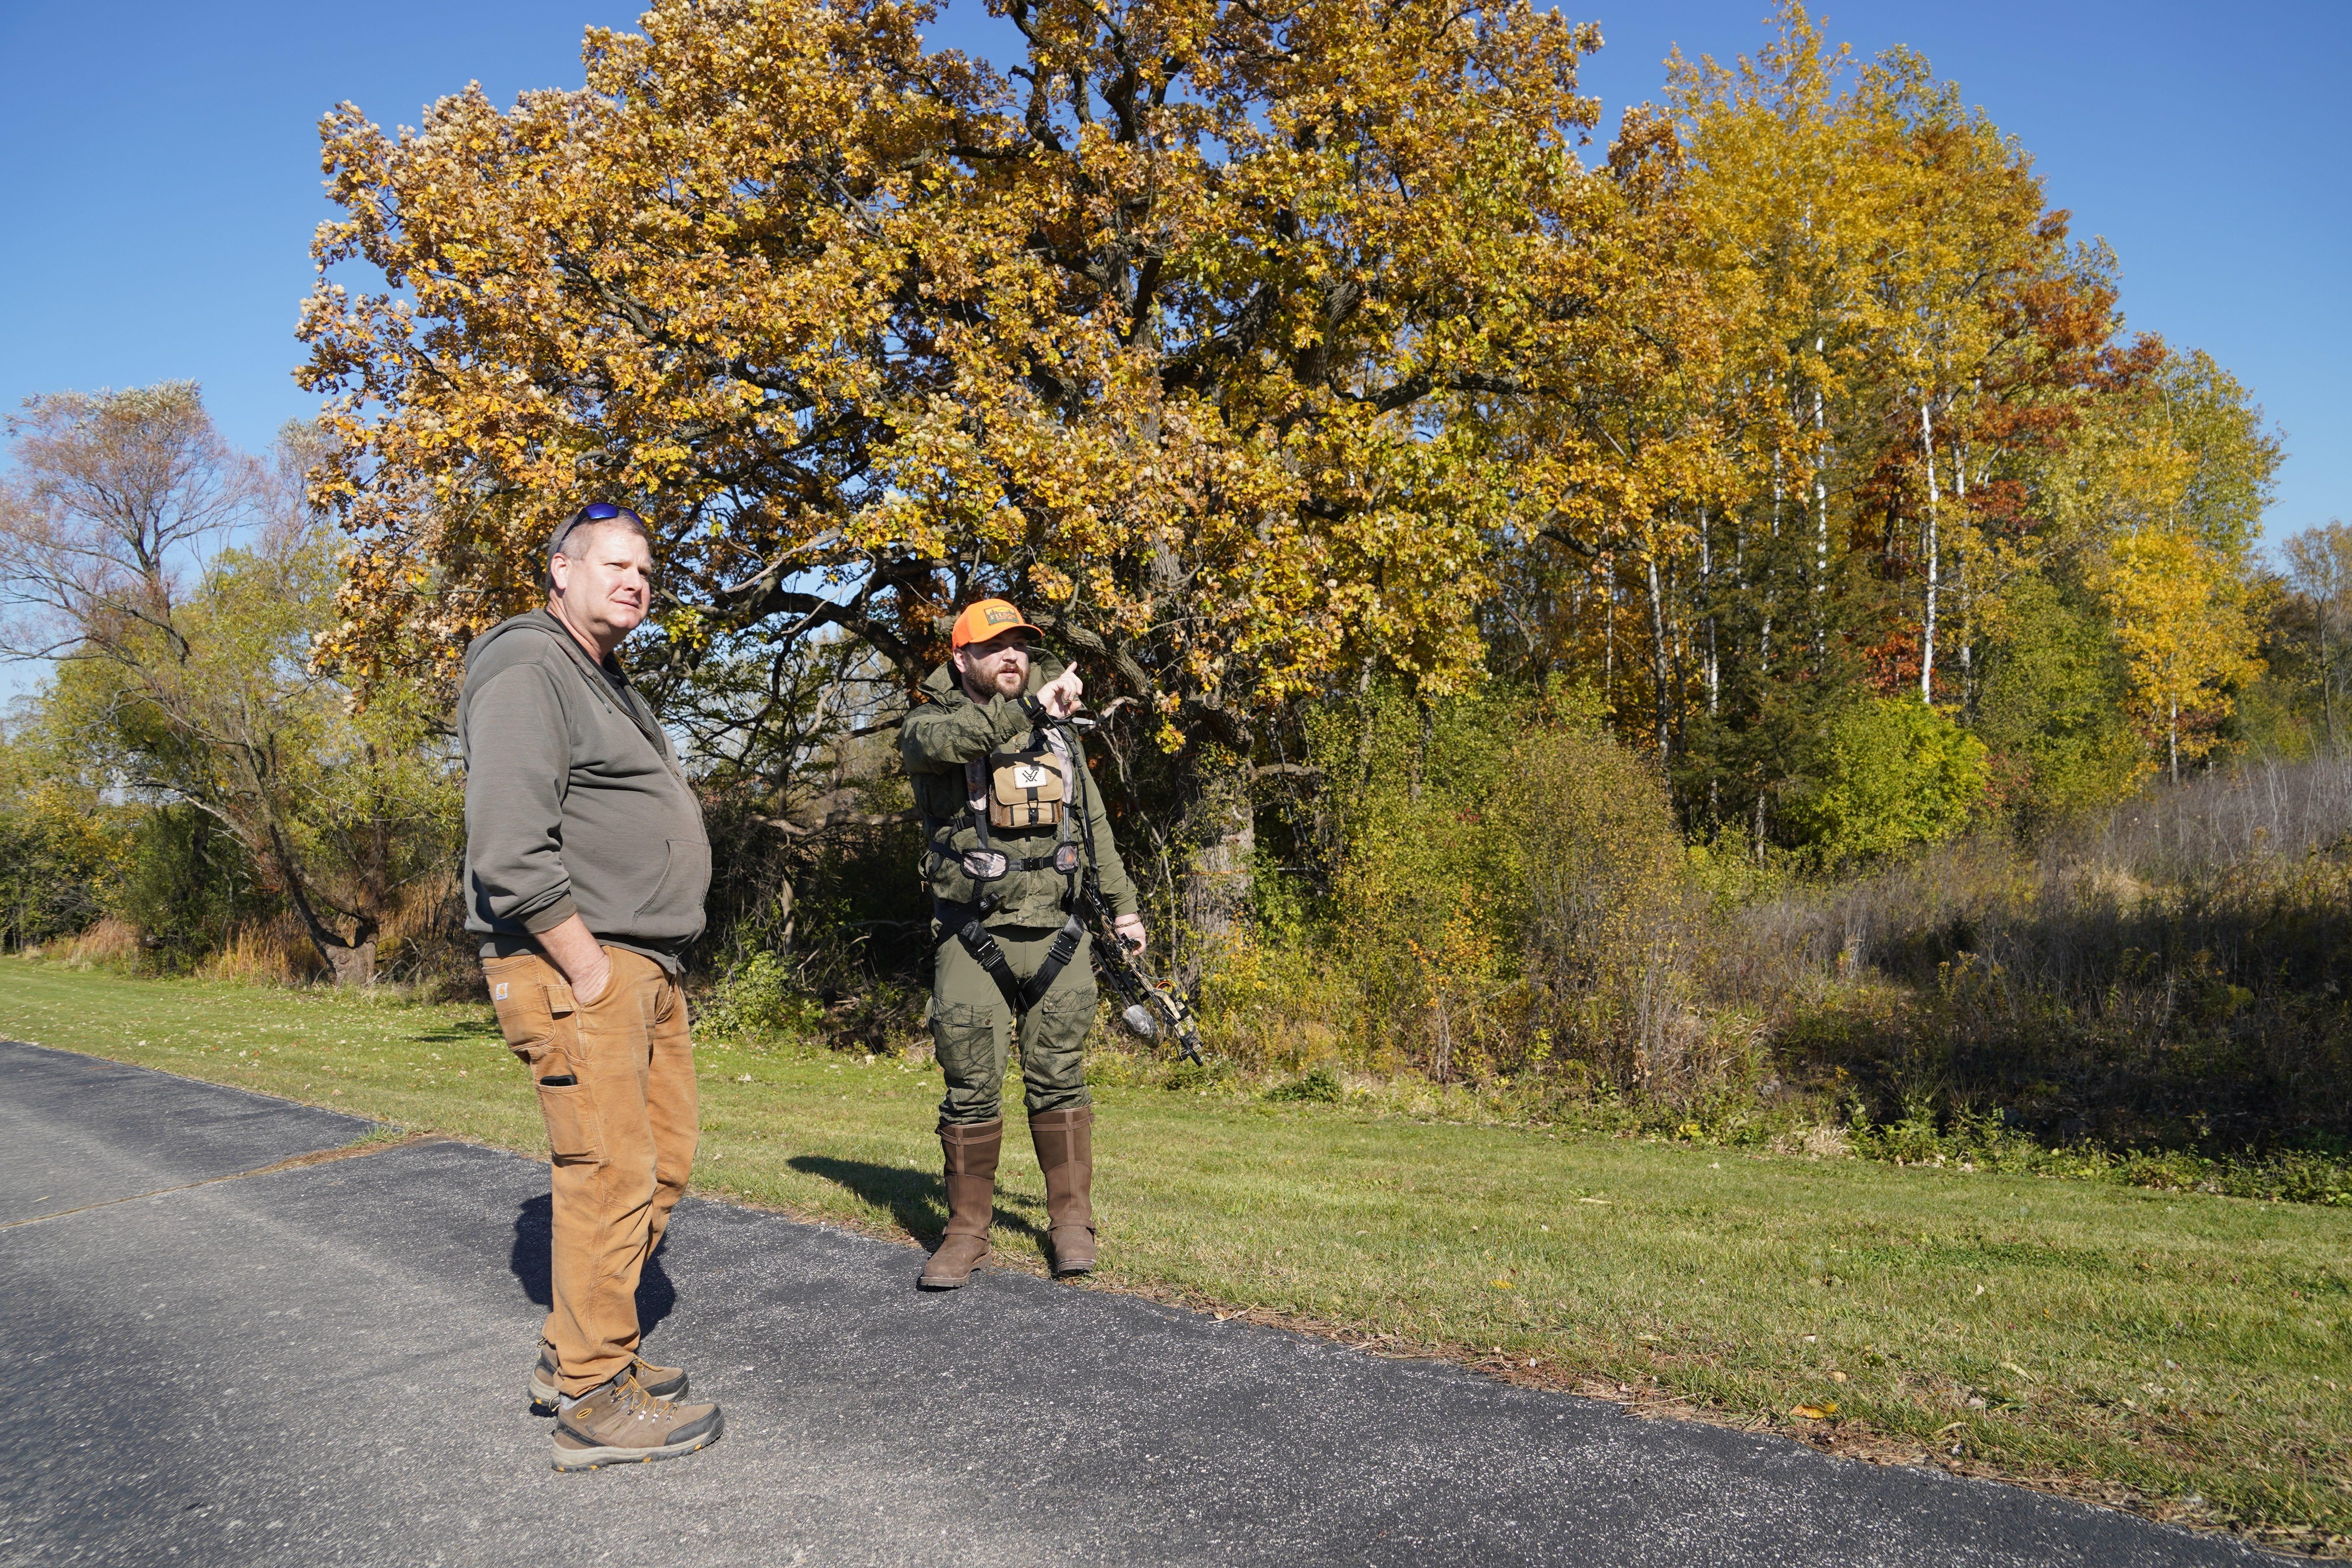 Jim Marsh, left, a member of the Delafield Deer Management Committee, talks with Dylan Baxter, a bowhunter participating in the city